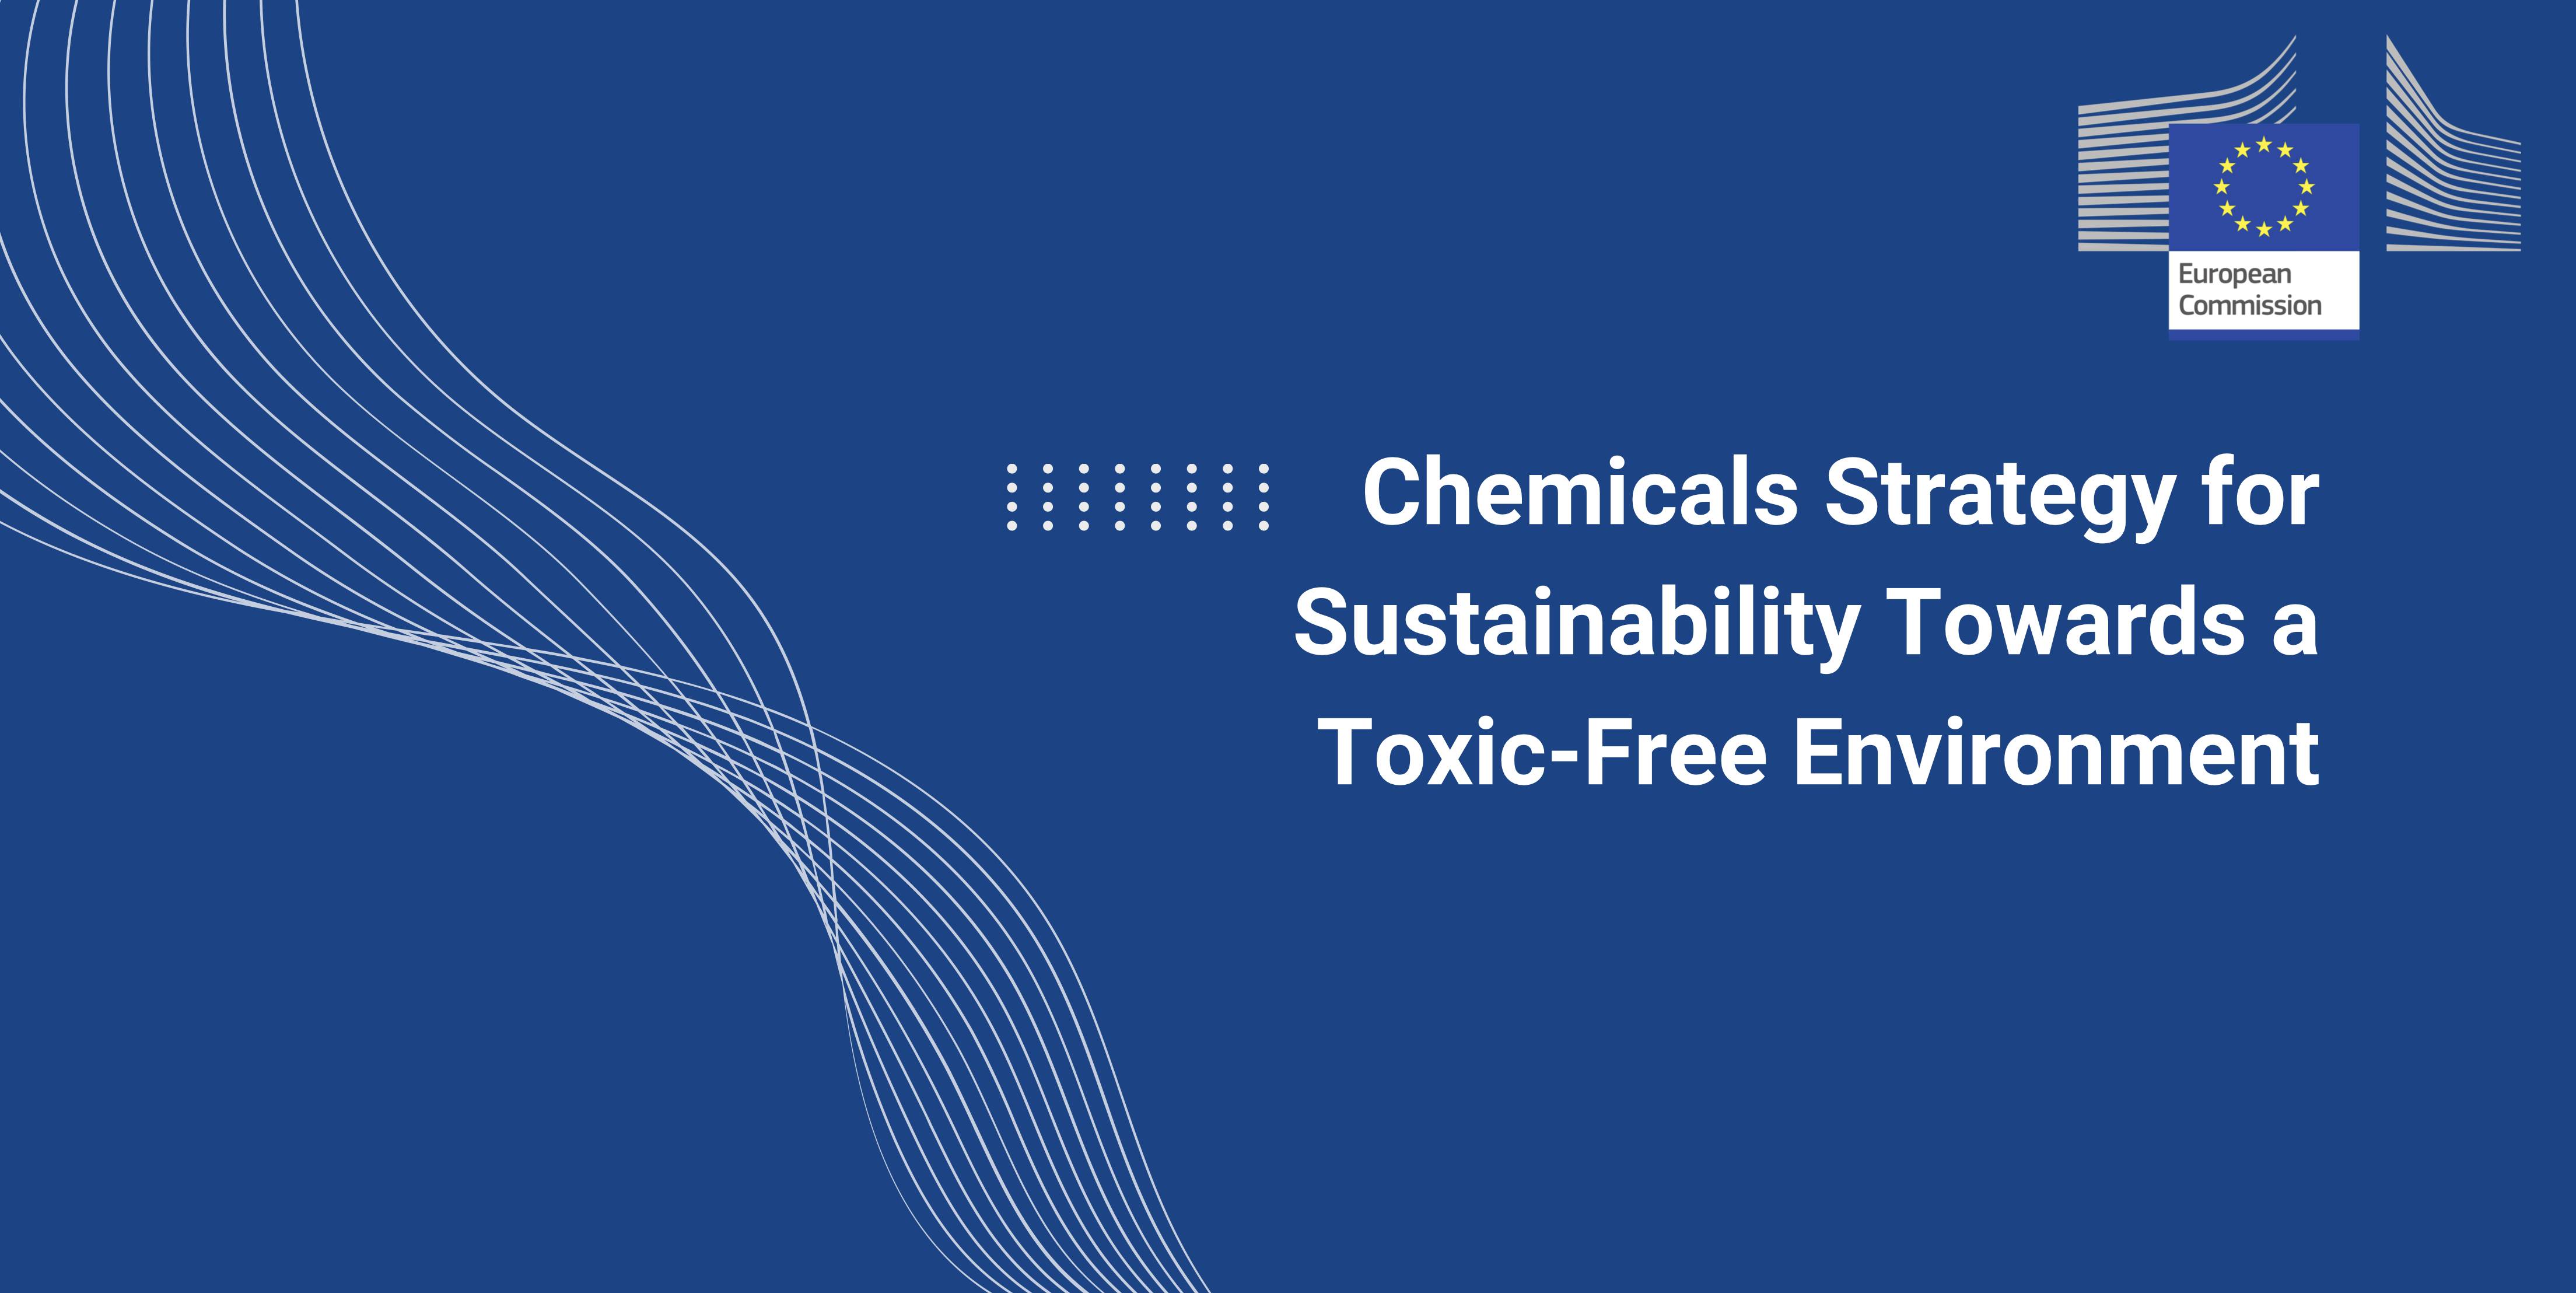 Chemicals Strategy for Sustainability Towards a Toxic-Free Environment